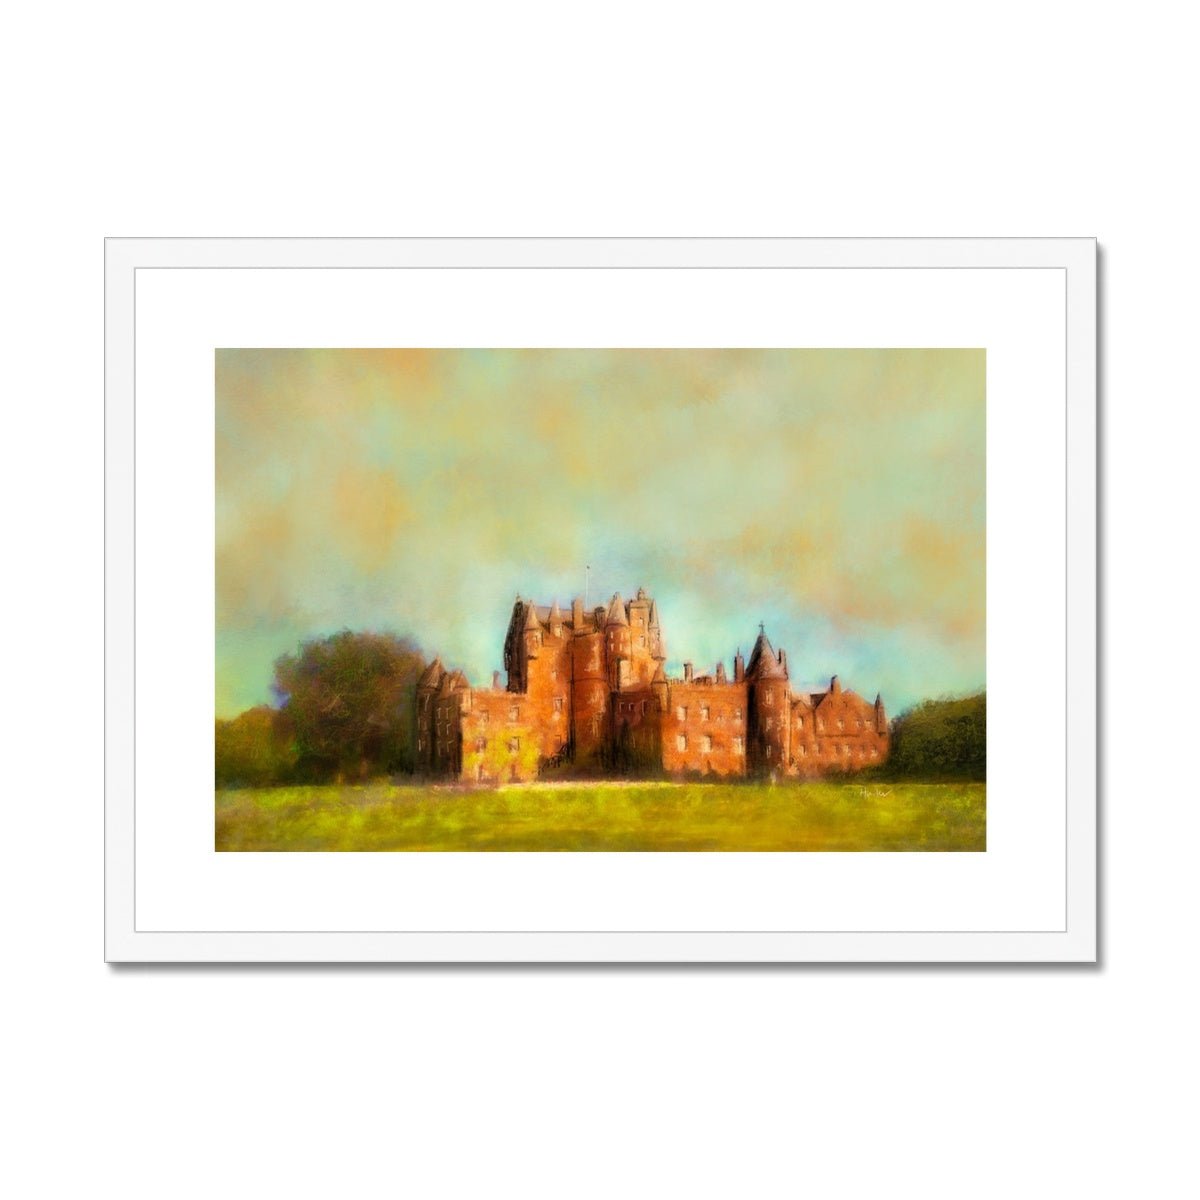 Glamis Castle Painting | Framed & Mounted Prints From Scotland-Framed & Mounted Prints-Scottish Castles Art Gallery-A2 Landscape-White Frame-Paintings, Prints, Homeware, Art Gifts From Scotland By Scottish Artist Kevin Hunter